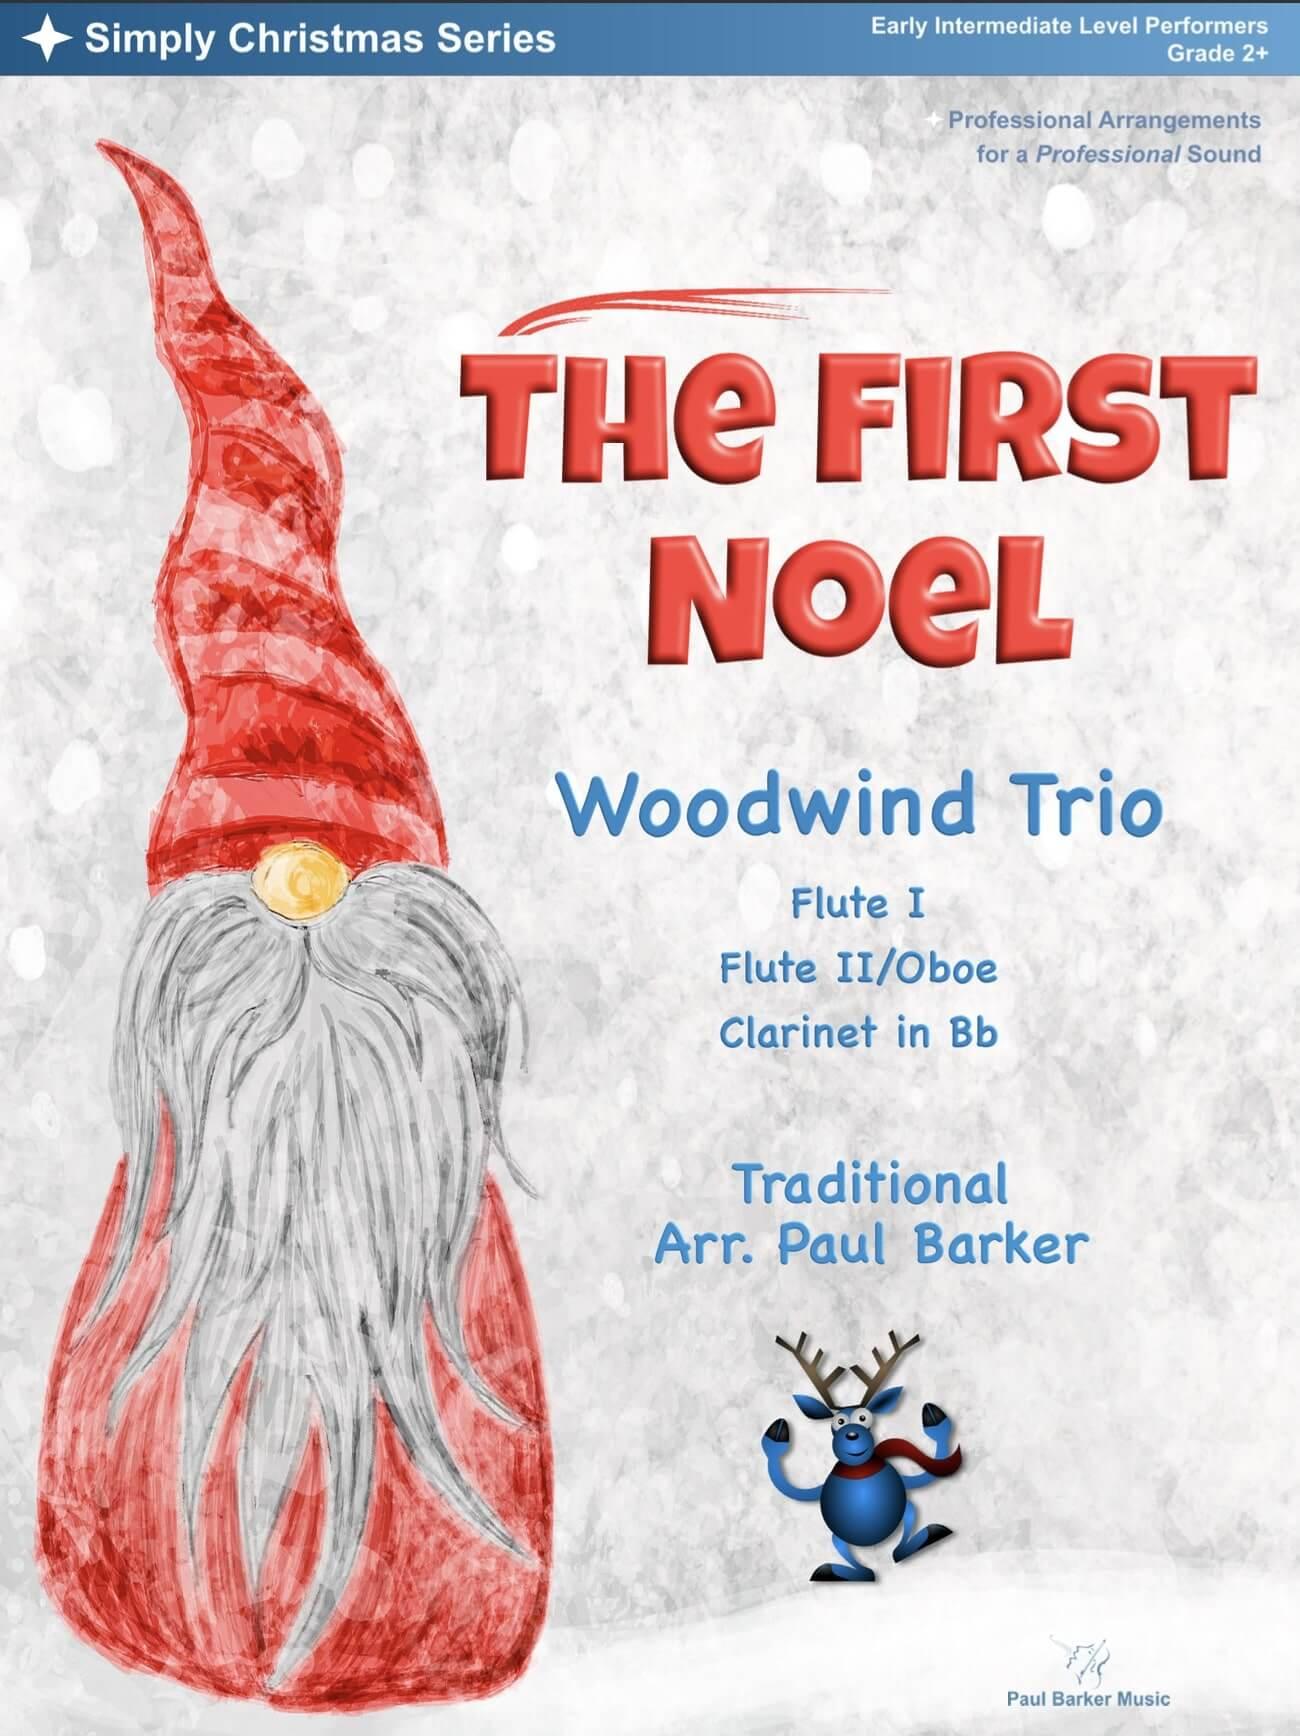 The First Noel (Woodwind Trio) - Paul Barker Music 